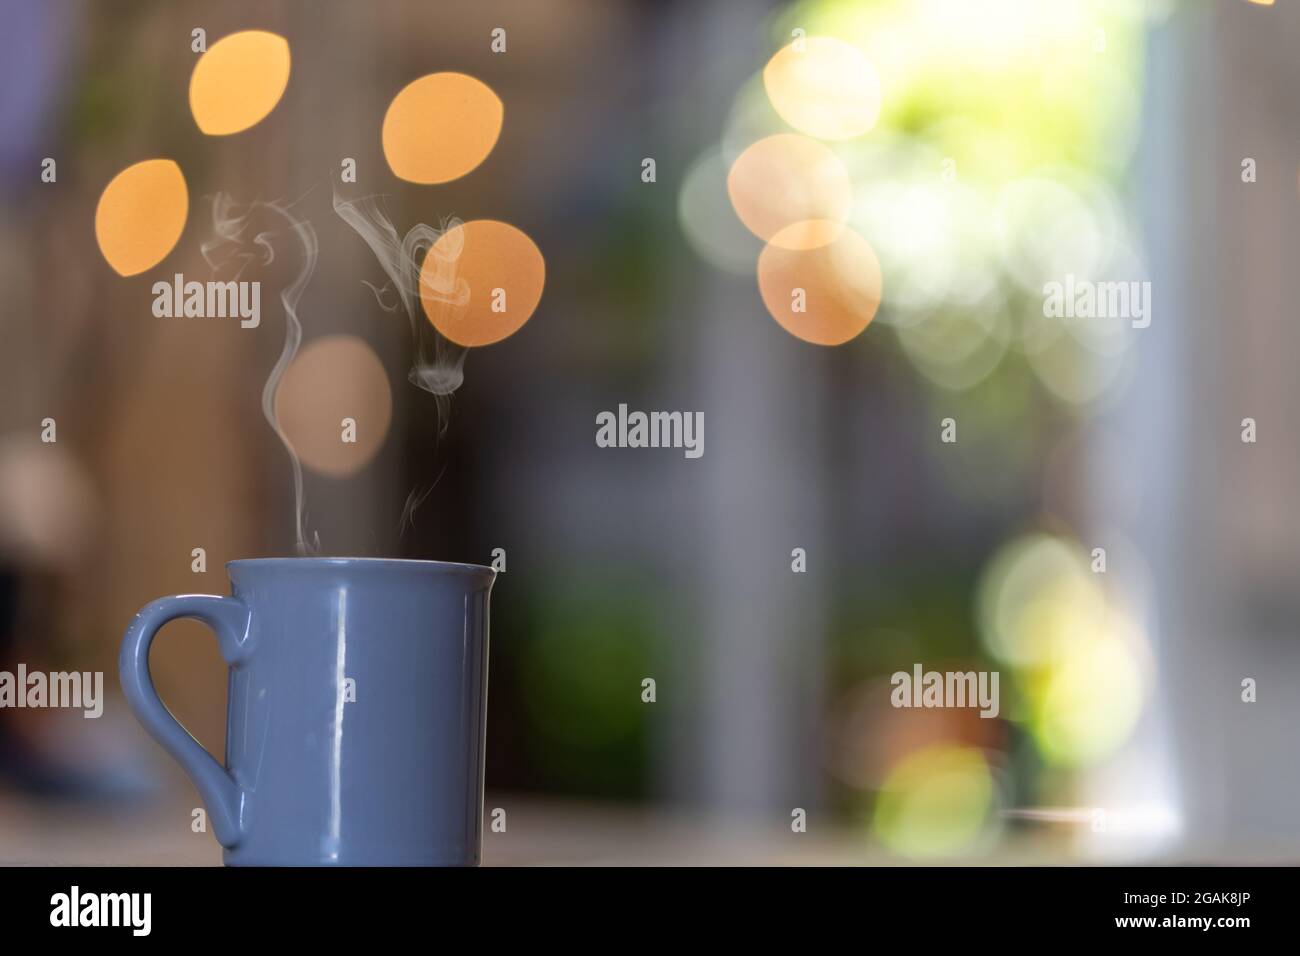 Selective focus of steam coming out of a mug against bokeh light background Stock Photo